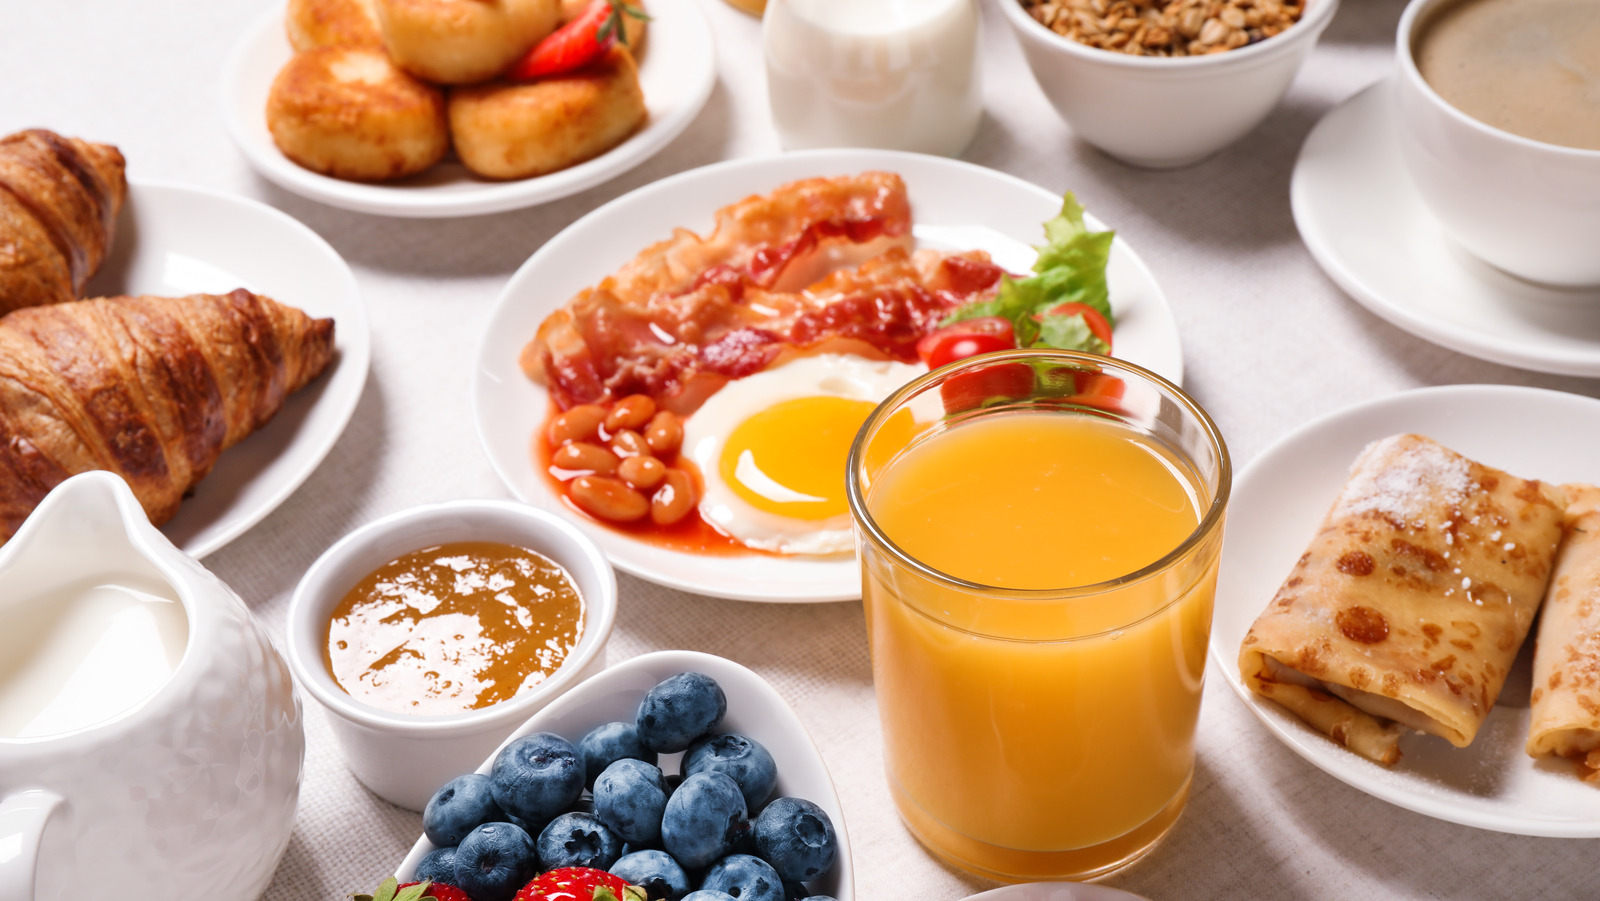 New Survey Reveals 38% Of People Say This Is Their Go-To Breakfast